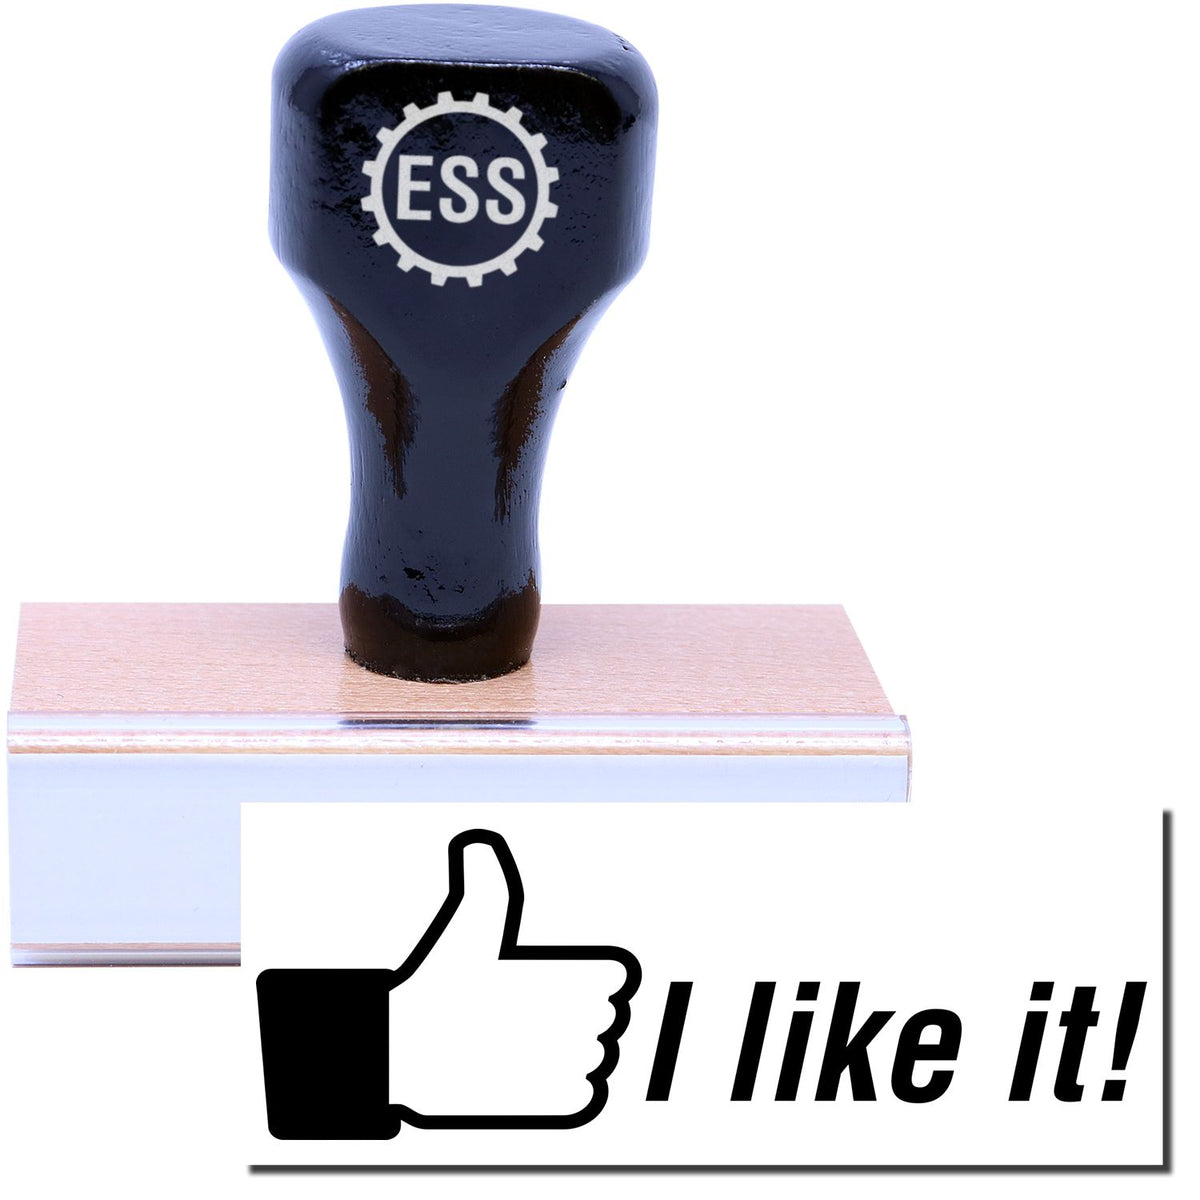 A stock office rubber stamp with a stamped image showing how the text &quot;I like it!&quot; in a large font with a thumbs-up icon on the left is displayed after stamping.